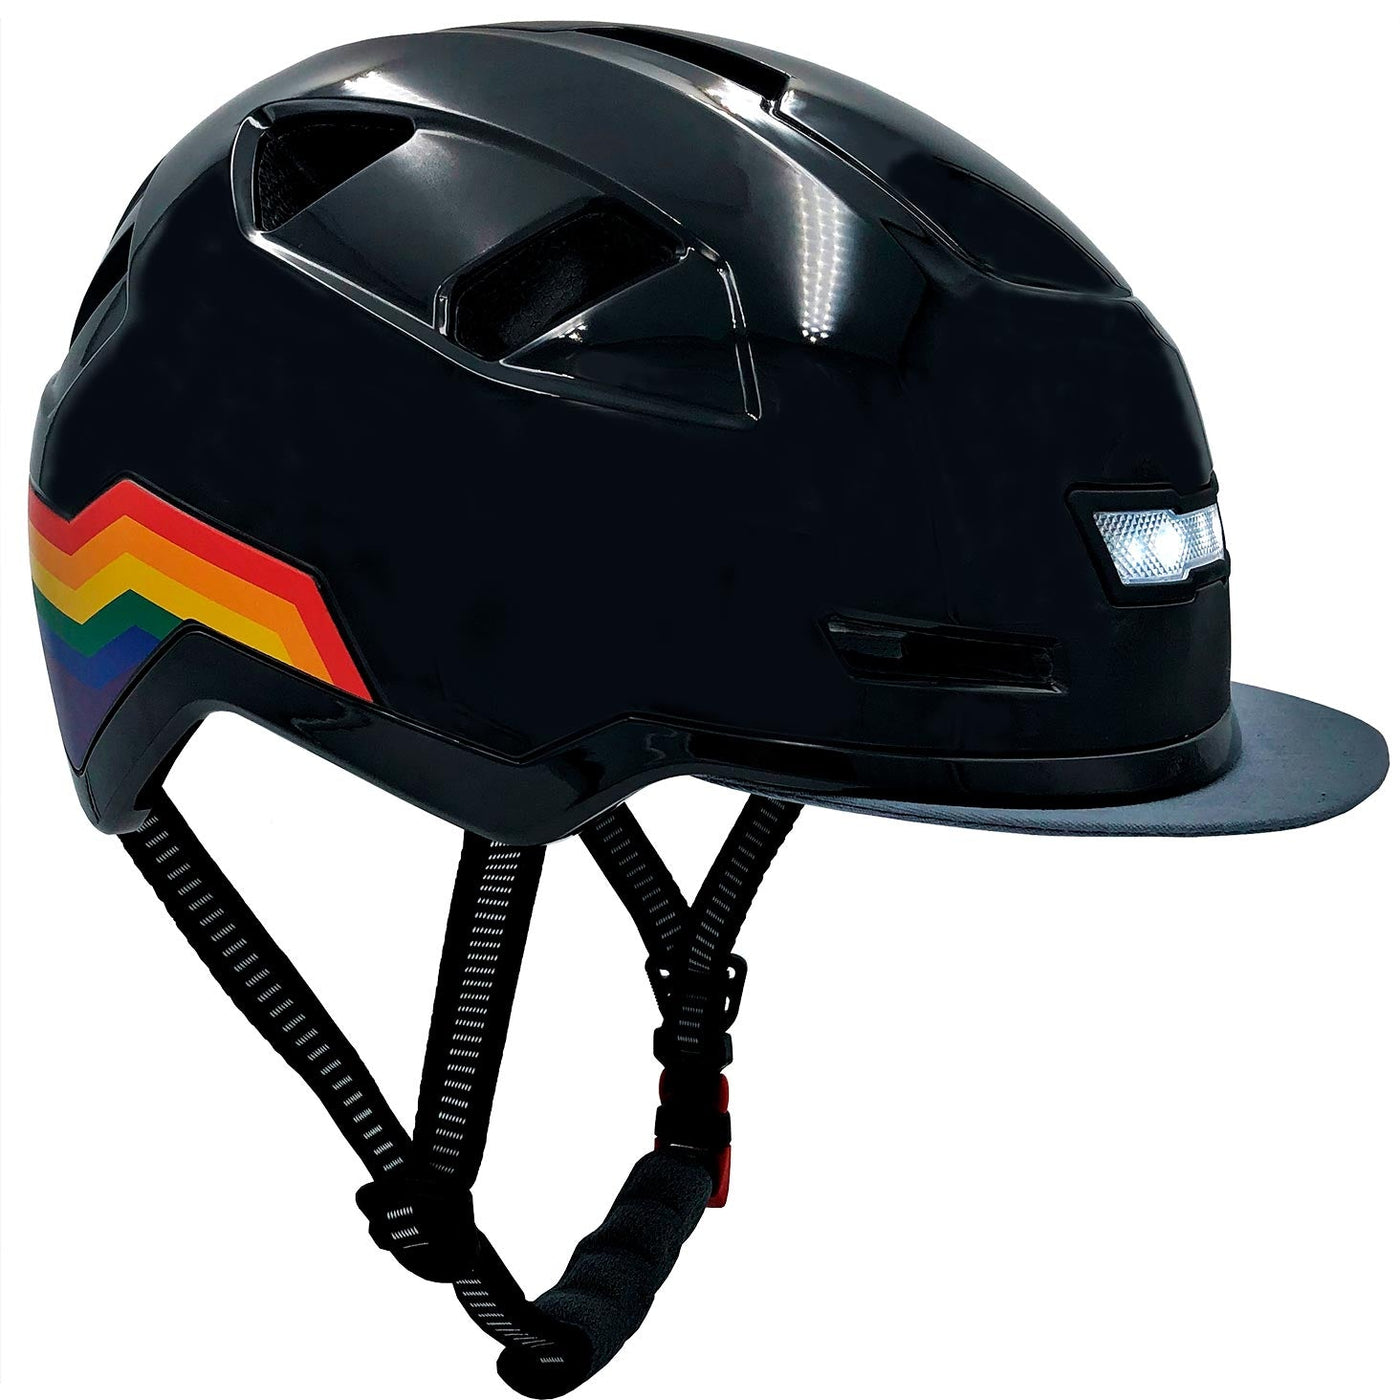 front view of xnito disco ebike helmet with lights